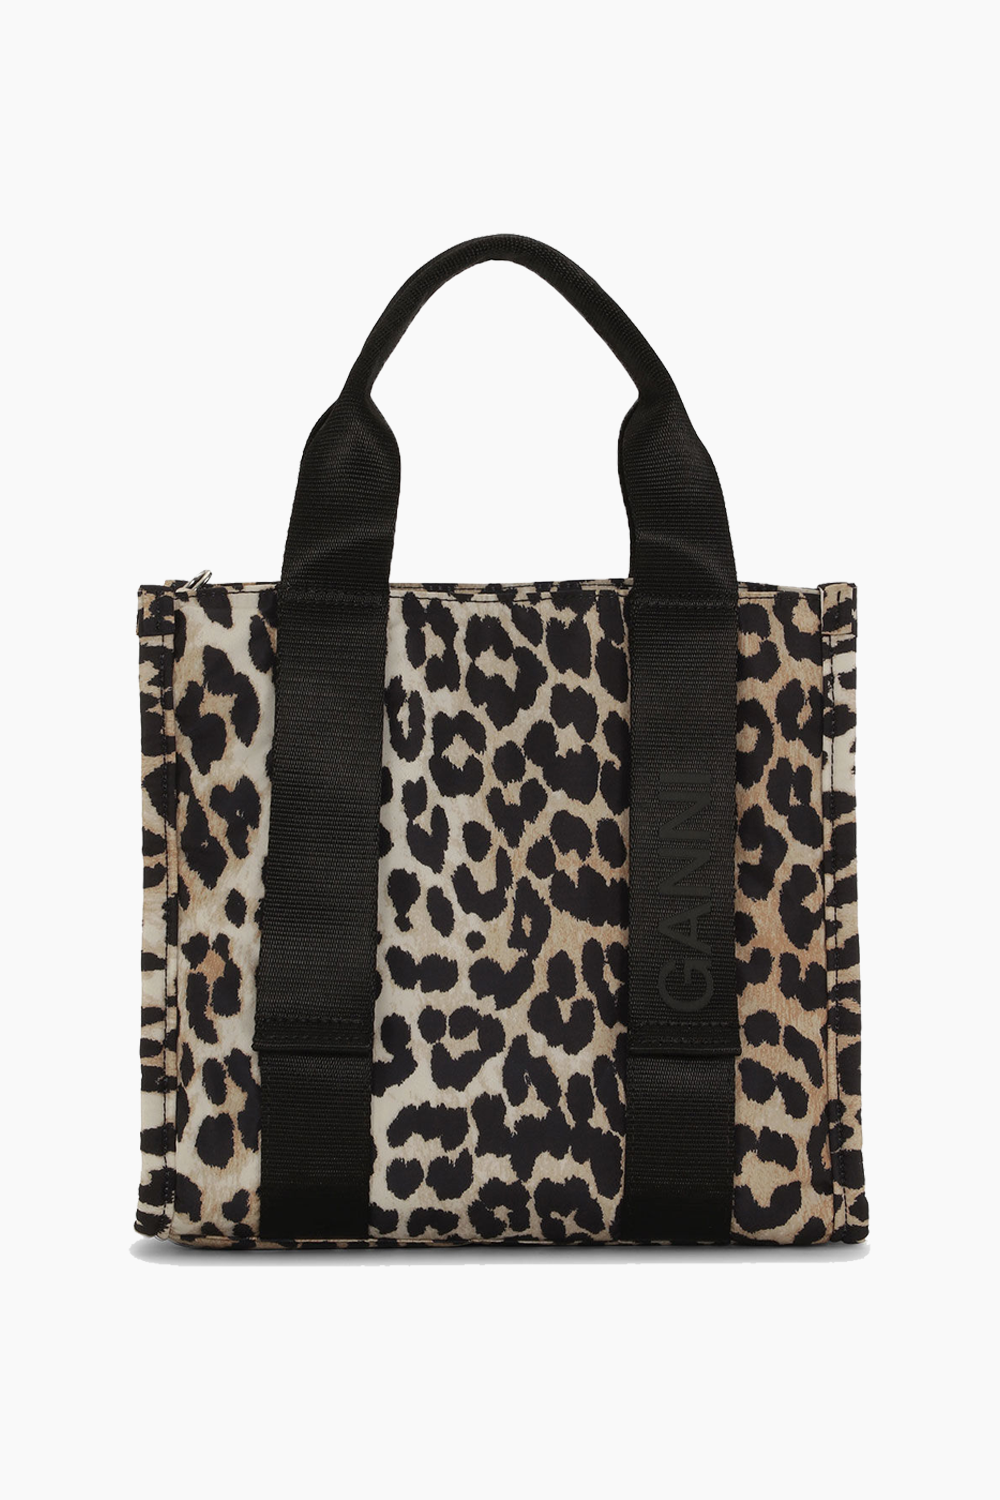 Billede af Recycled Tech Small Tote Print A4955 - Leopard - GANNI - Leopard One Size